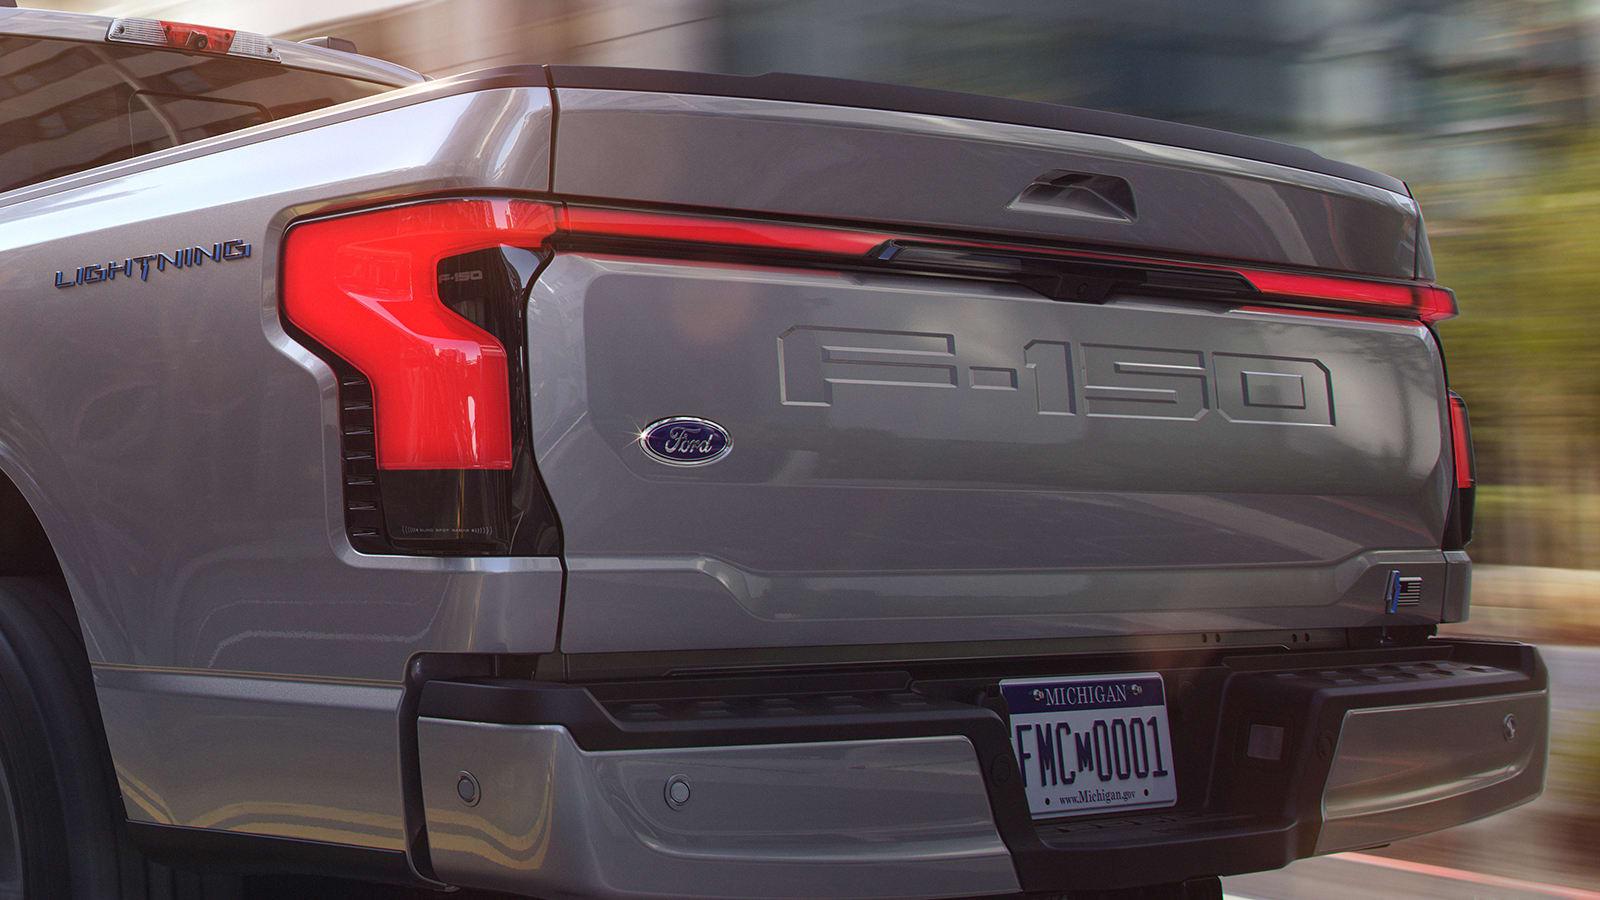 Ford F-150 Lightning New F-150 Lightning  PRO and XLT pictures in the flesh tailgate-lights